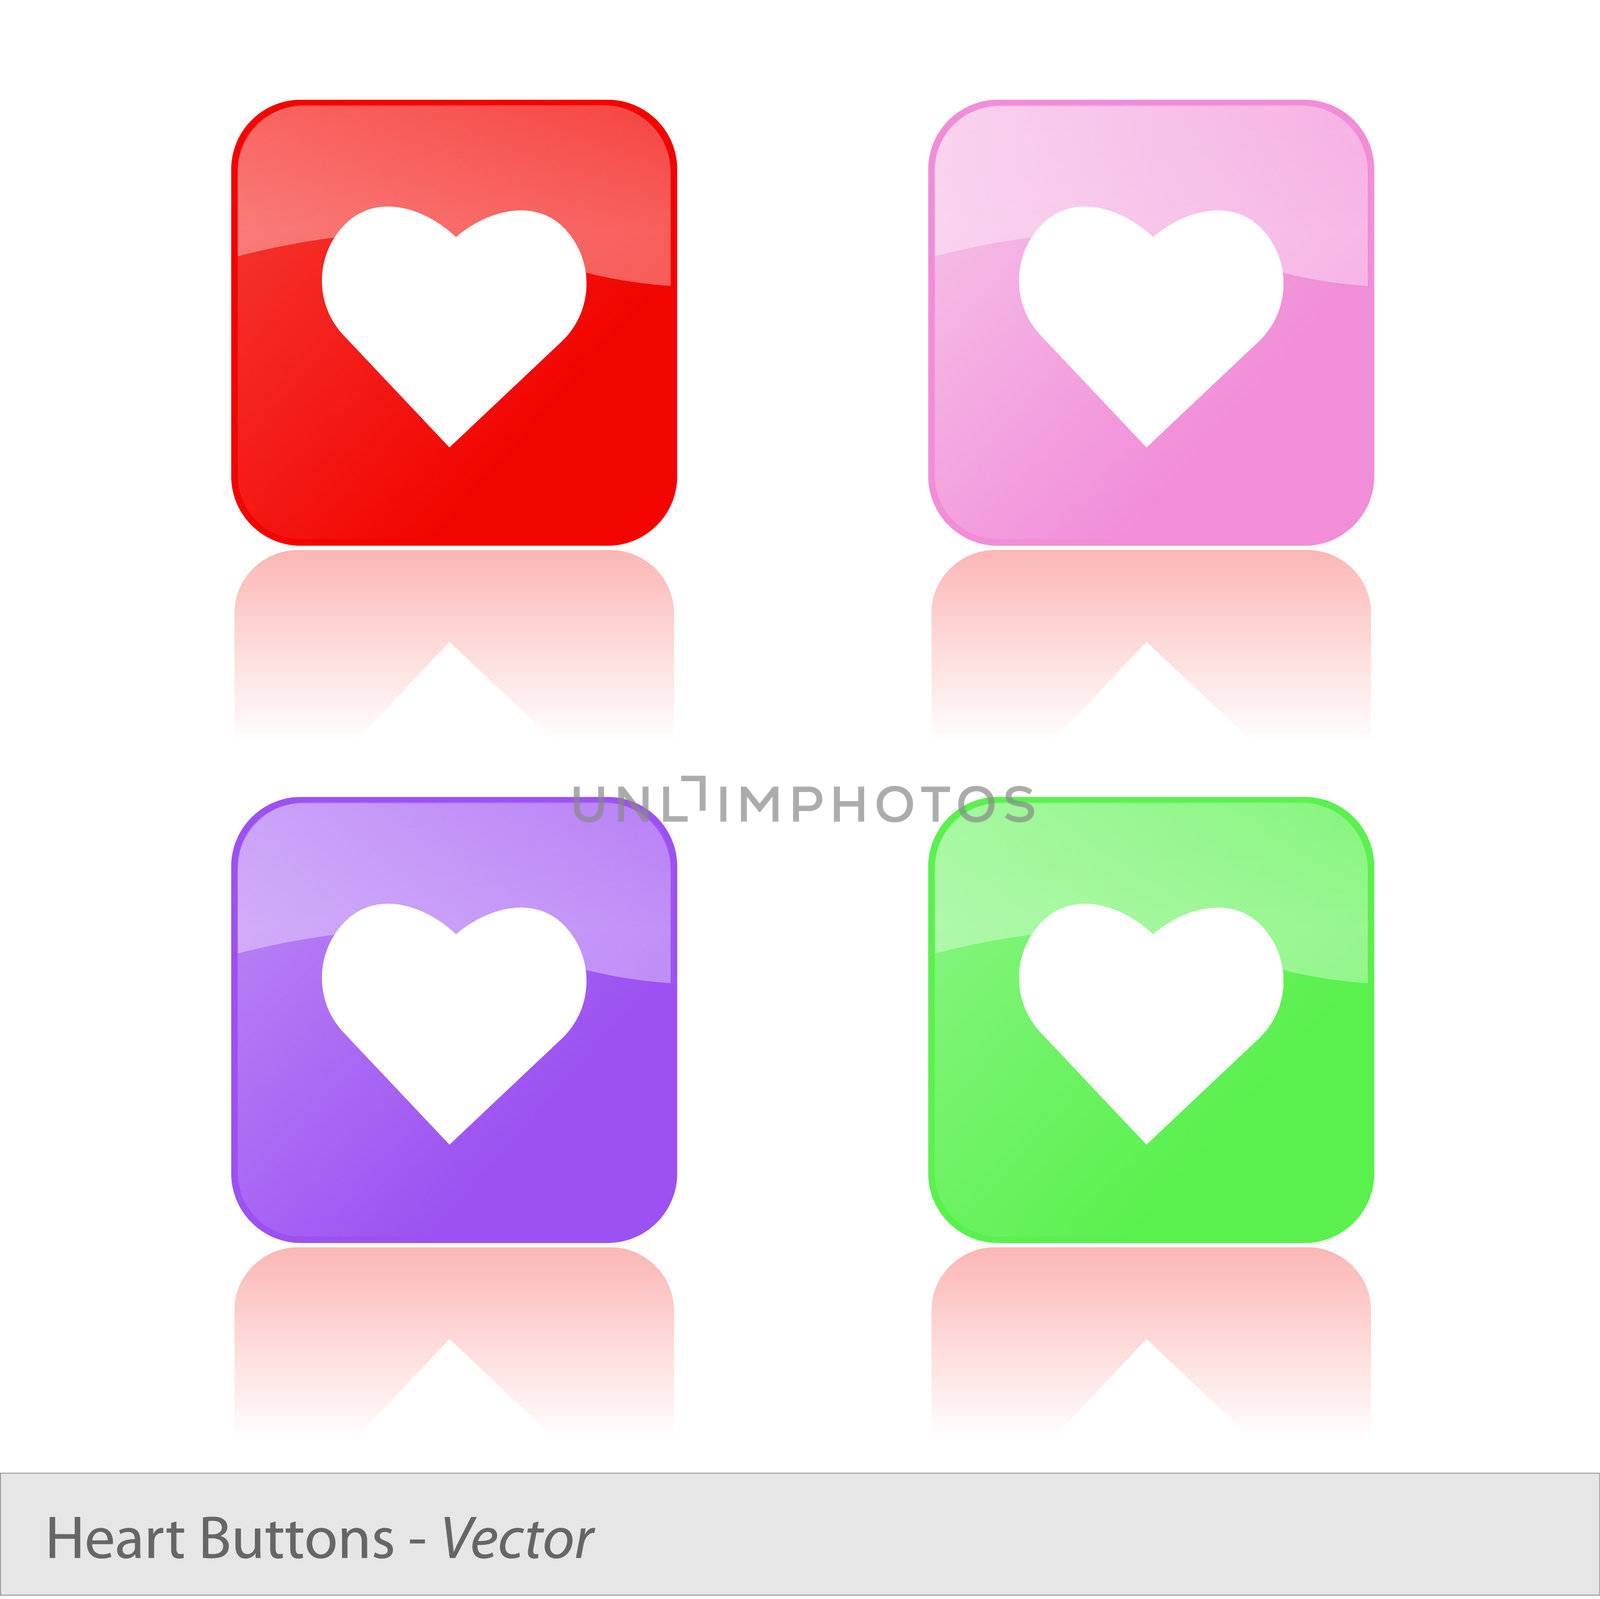 Heart Buttons by nmarques74